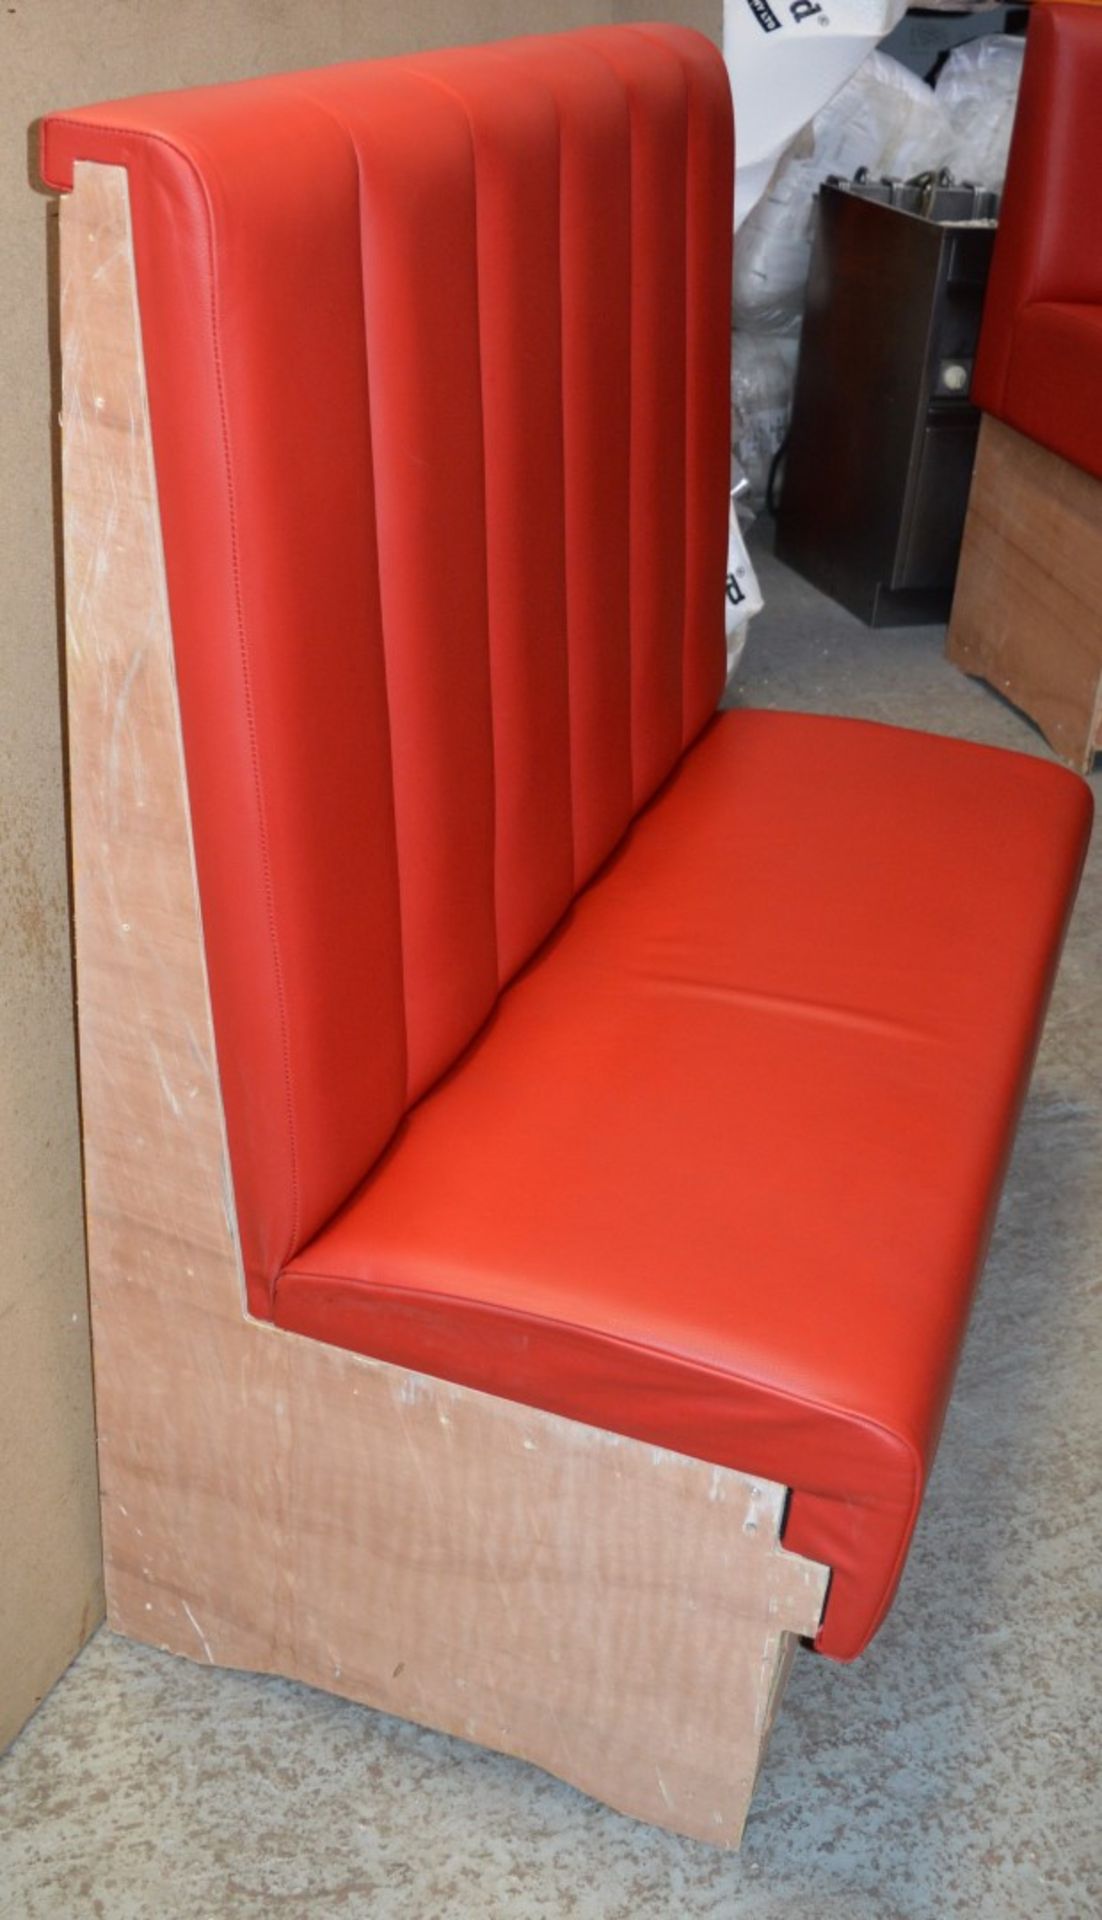 1 x High Back Single Seating Bench Upholstered in Red Leather - Sits upto Two People - High - Image 15 of 17